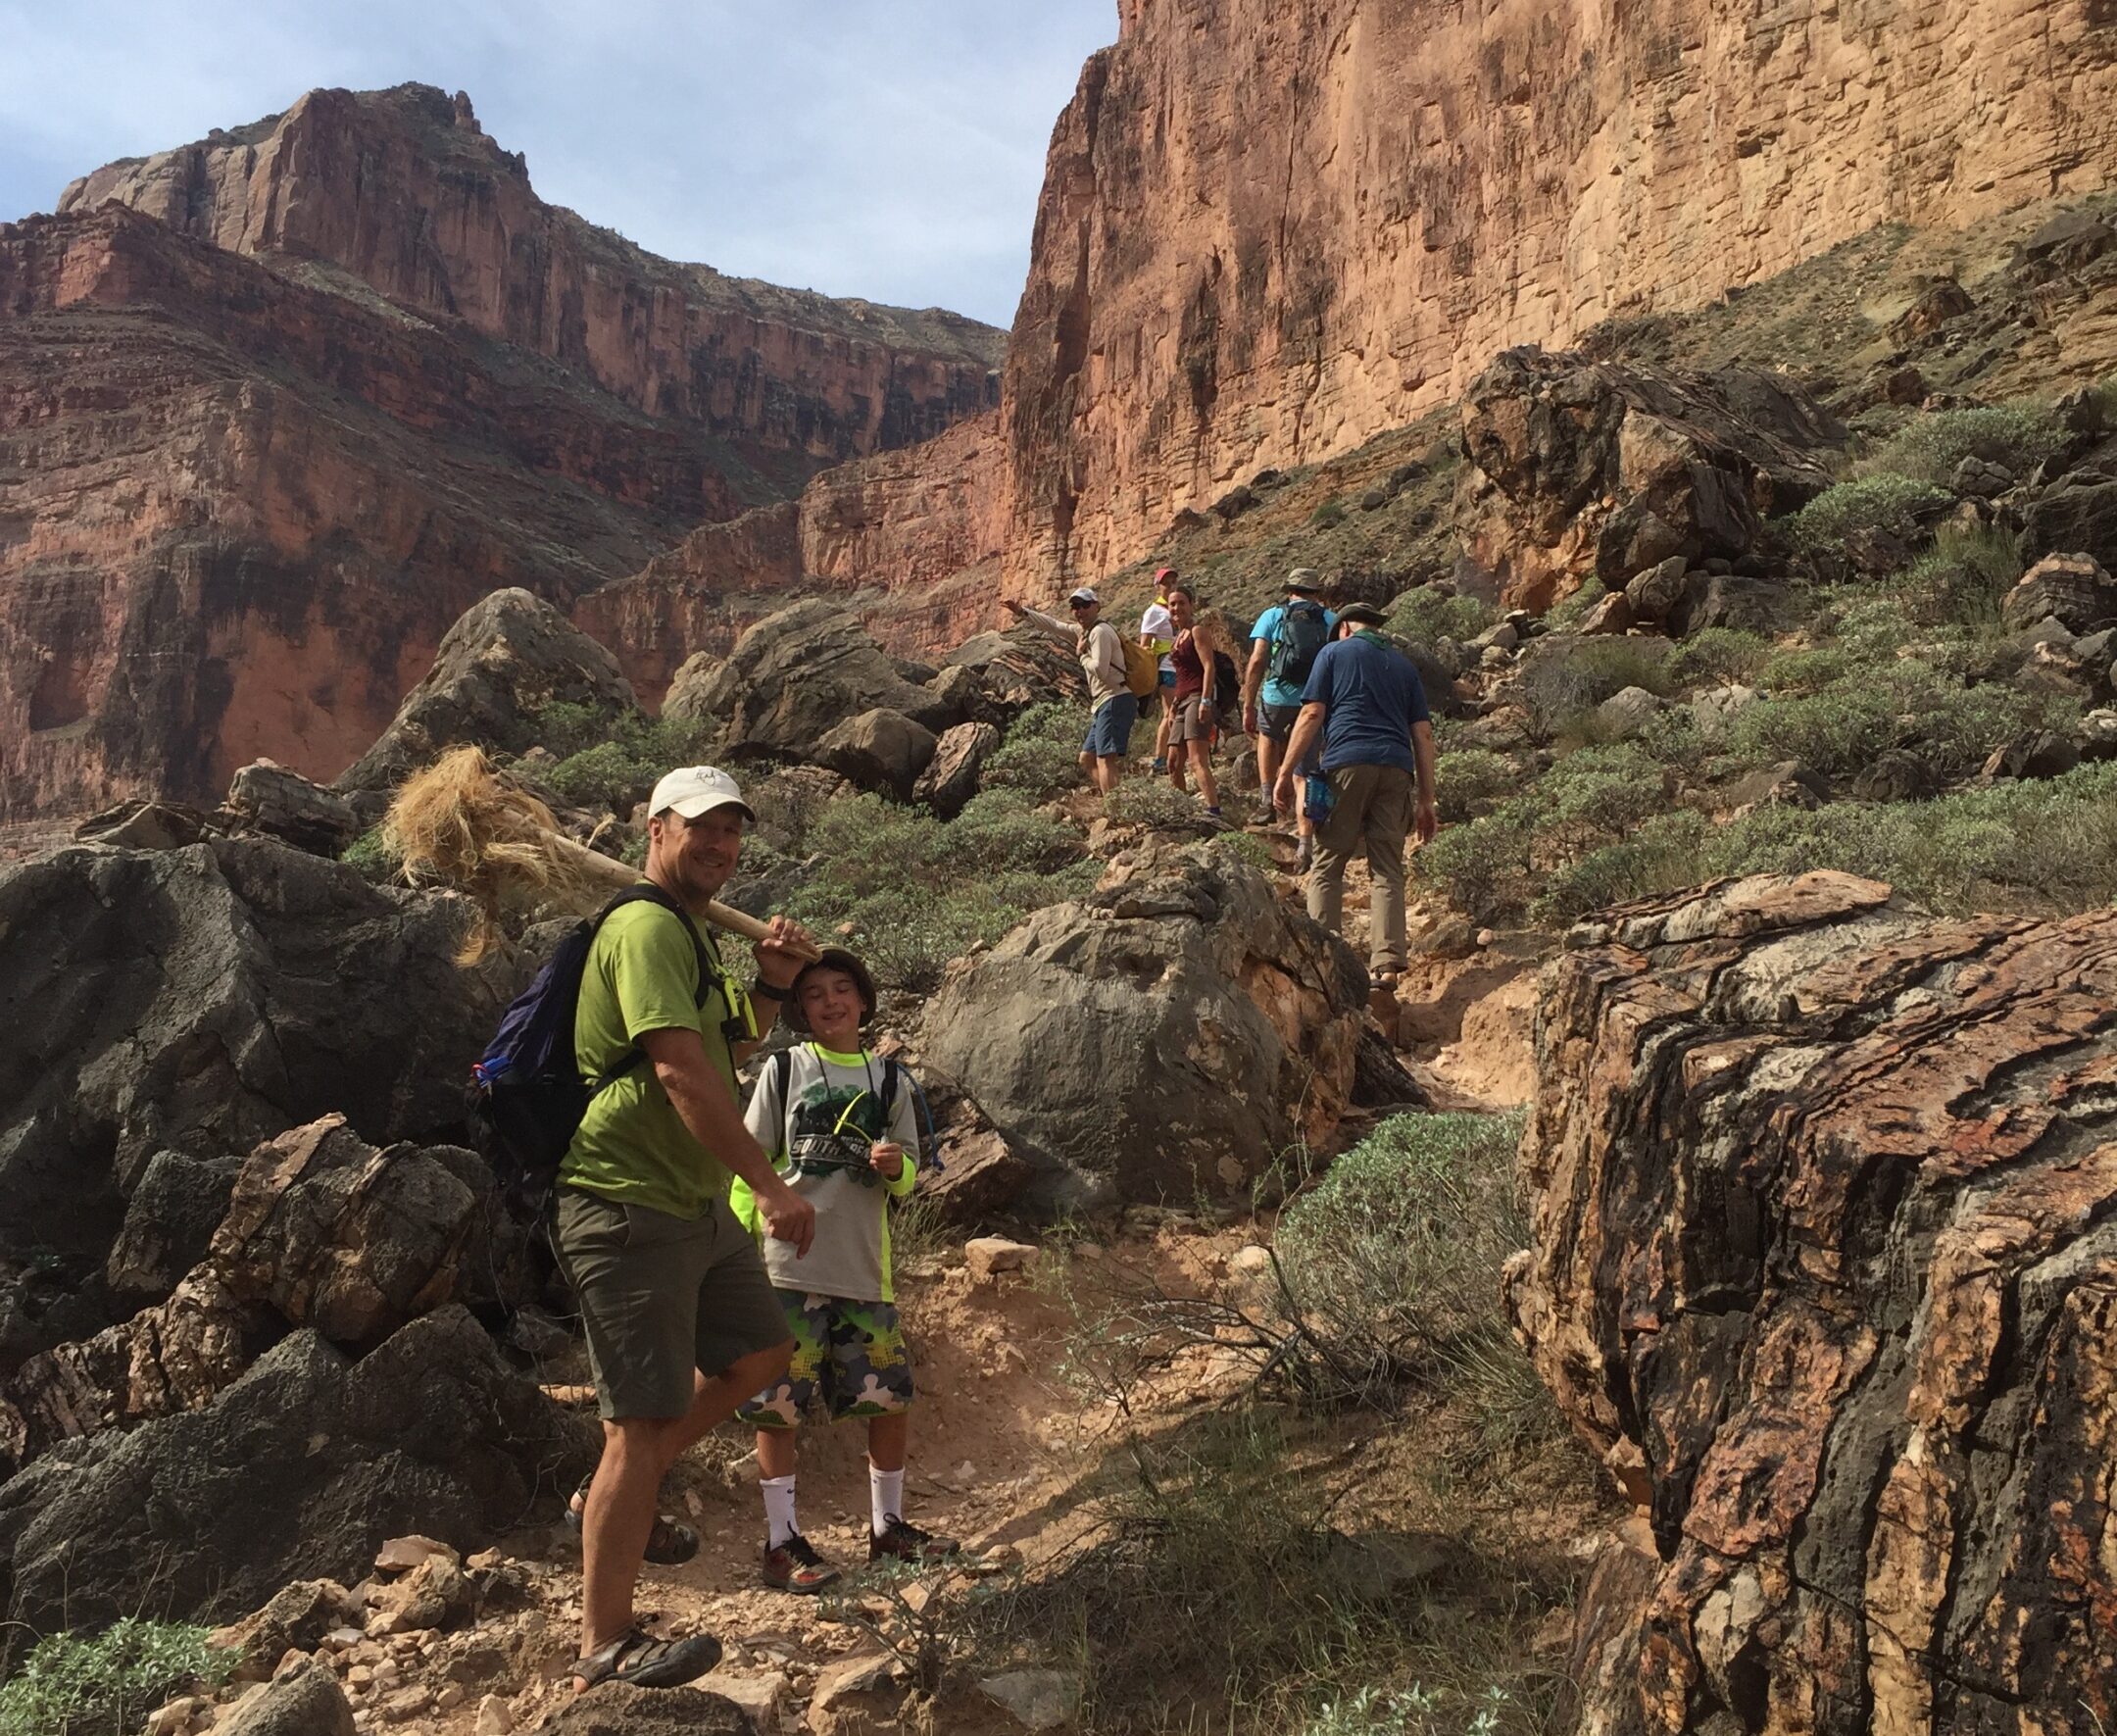 Guests hiking up a rocky trail in the Grand Canyon. Photo credit: Wally Werderich.